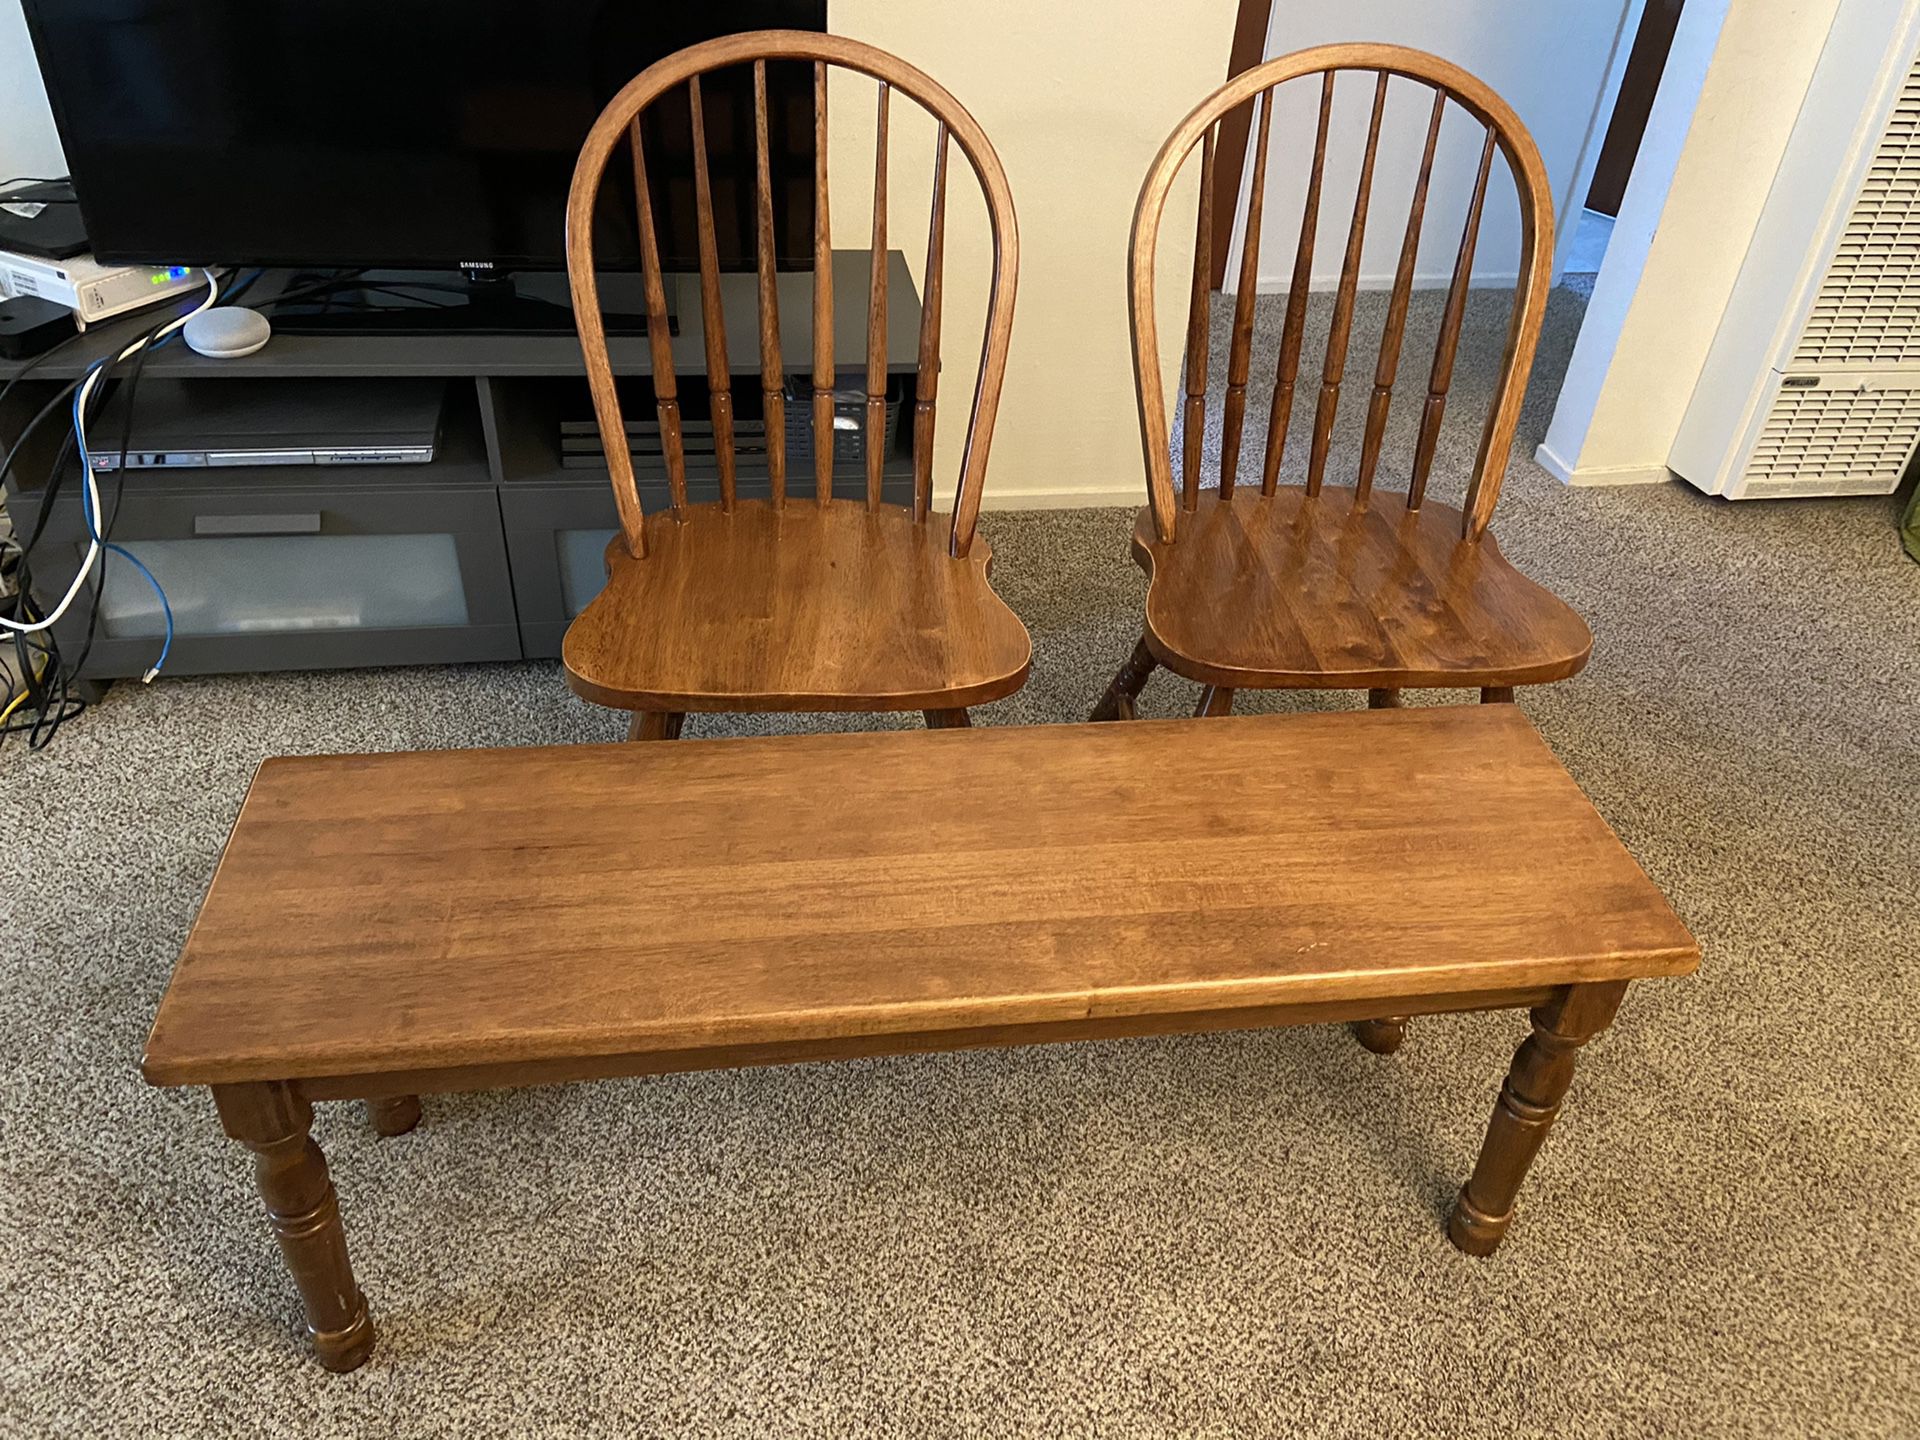 2 brown wooden chairs and a bench